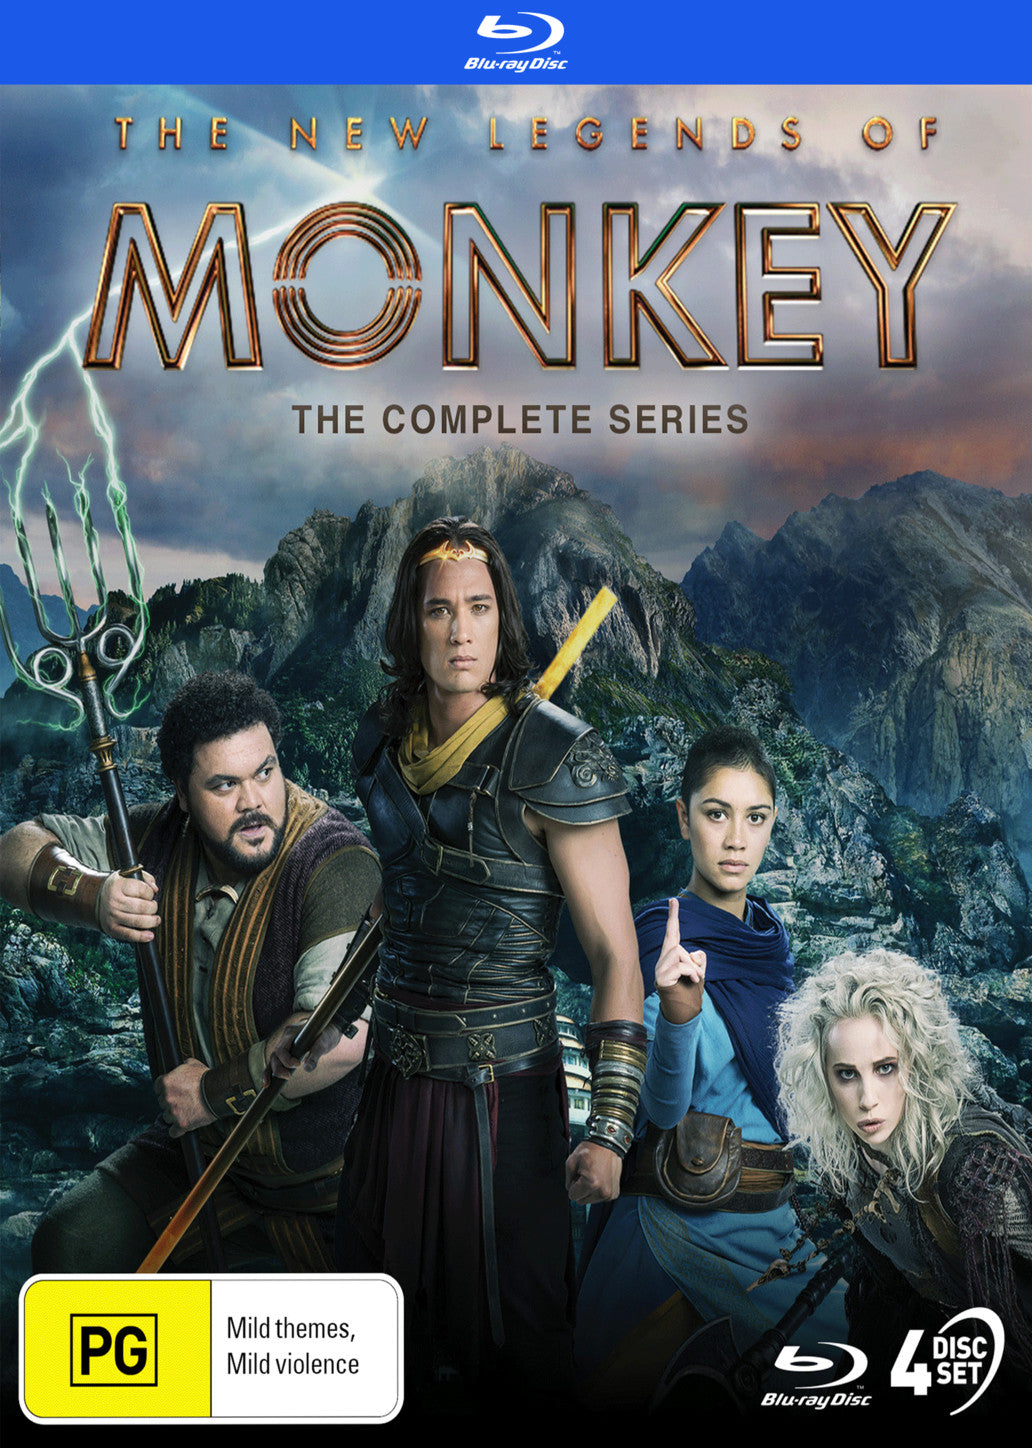 THE NEW LEGENDS OF MONKEY: SEASONS 1 & 2 - SPECIAL EDITION BLU-RAY